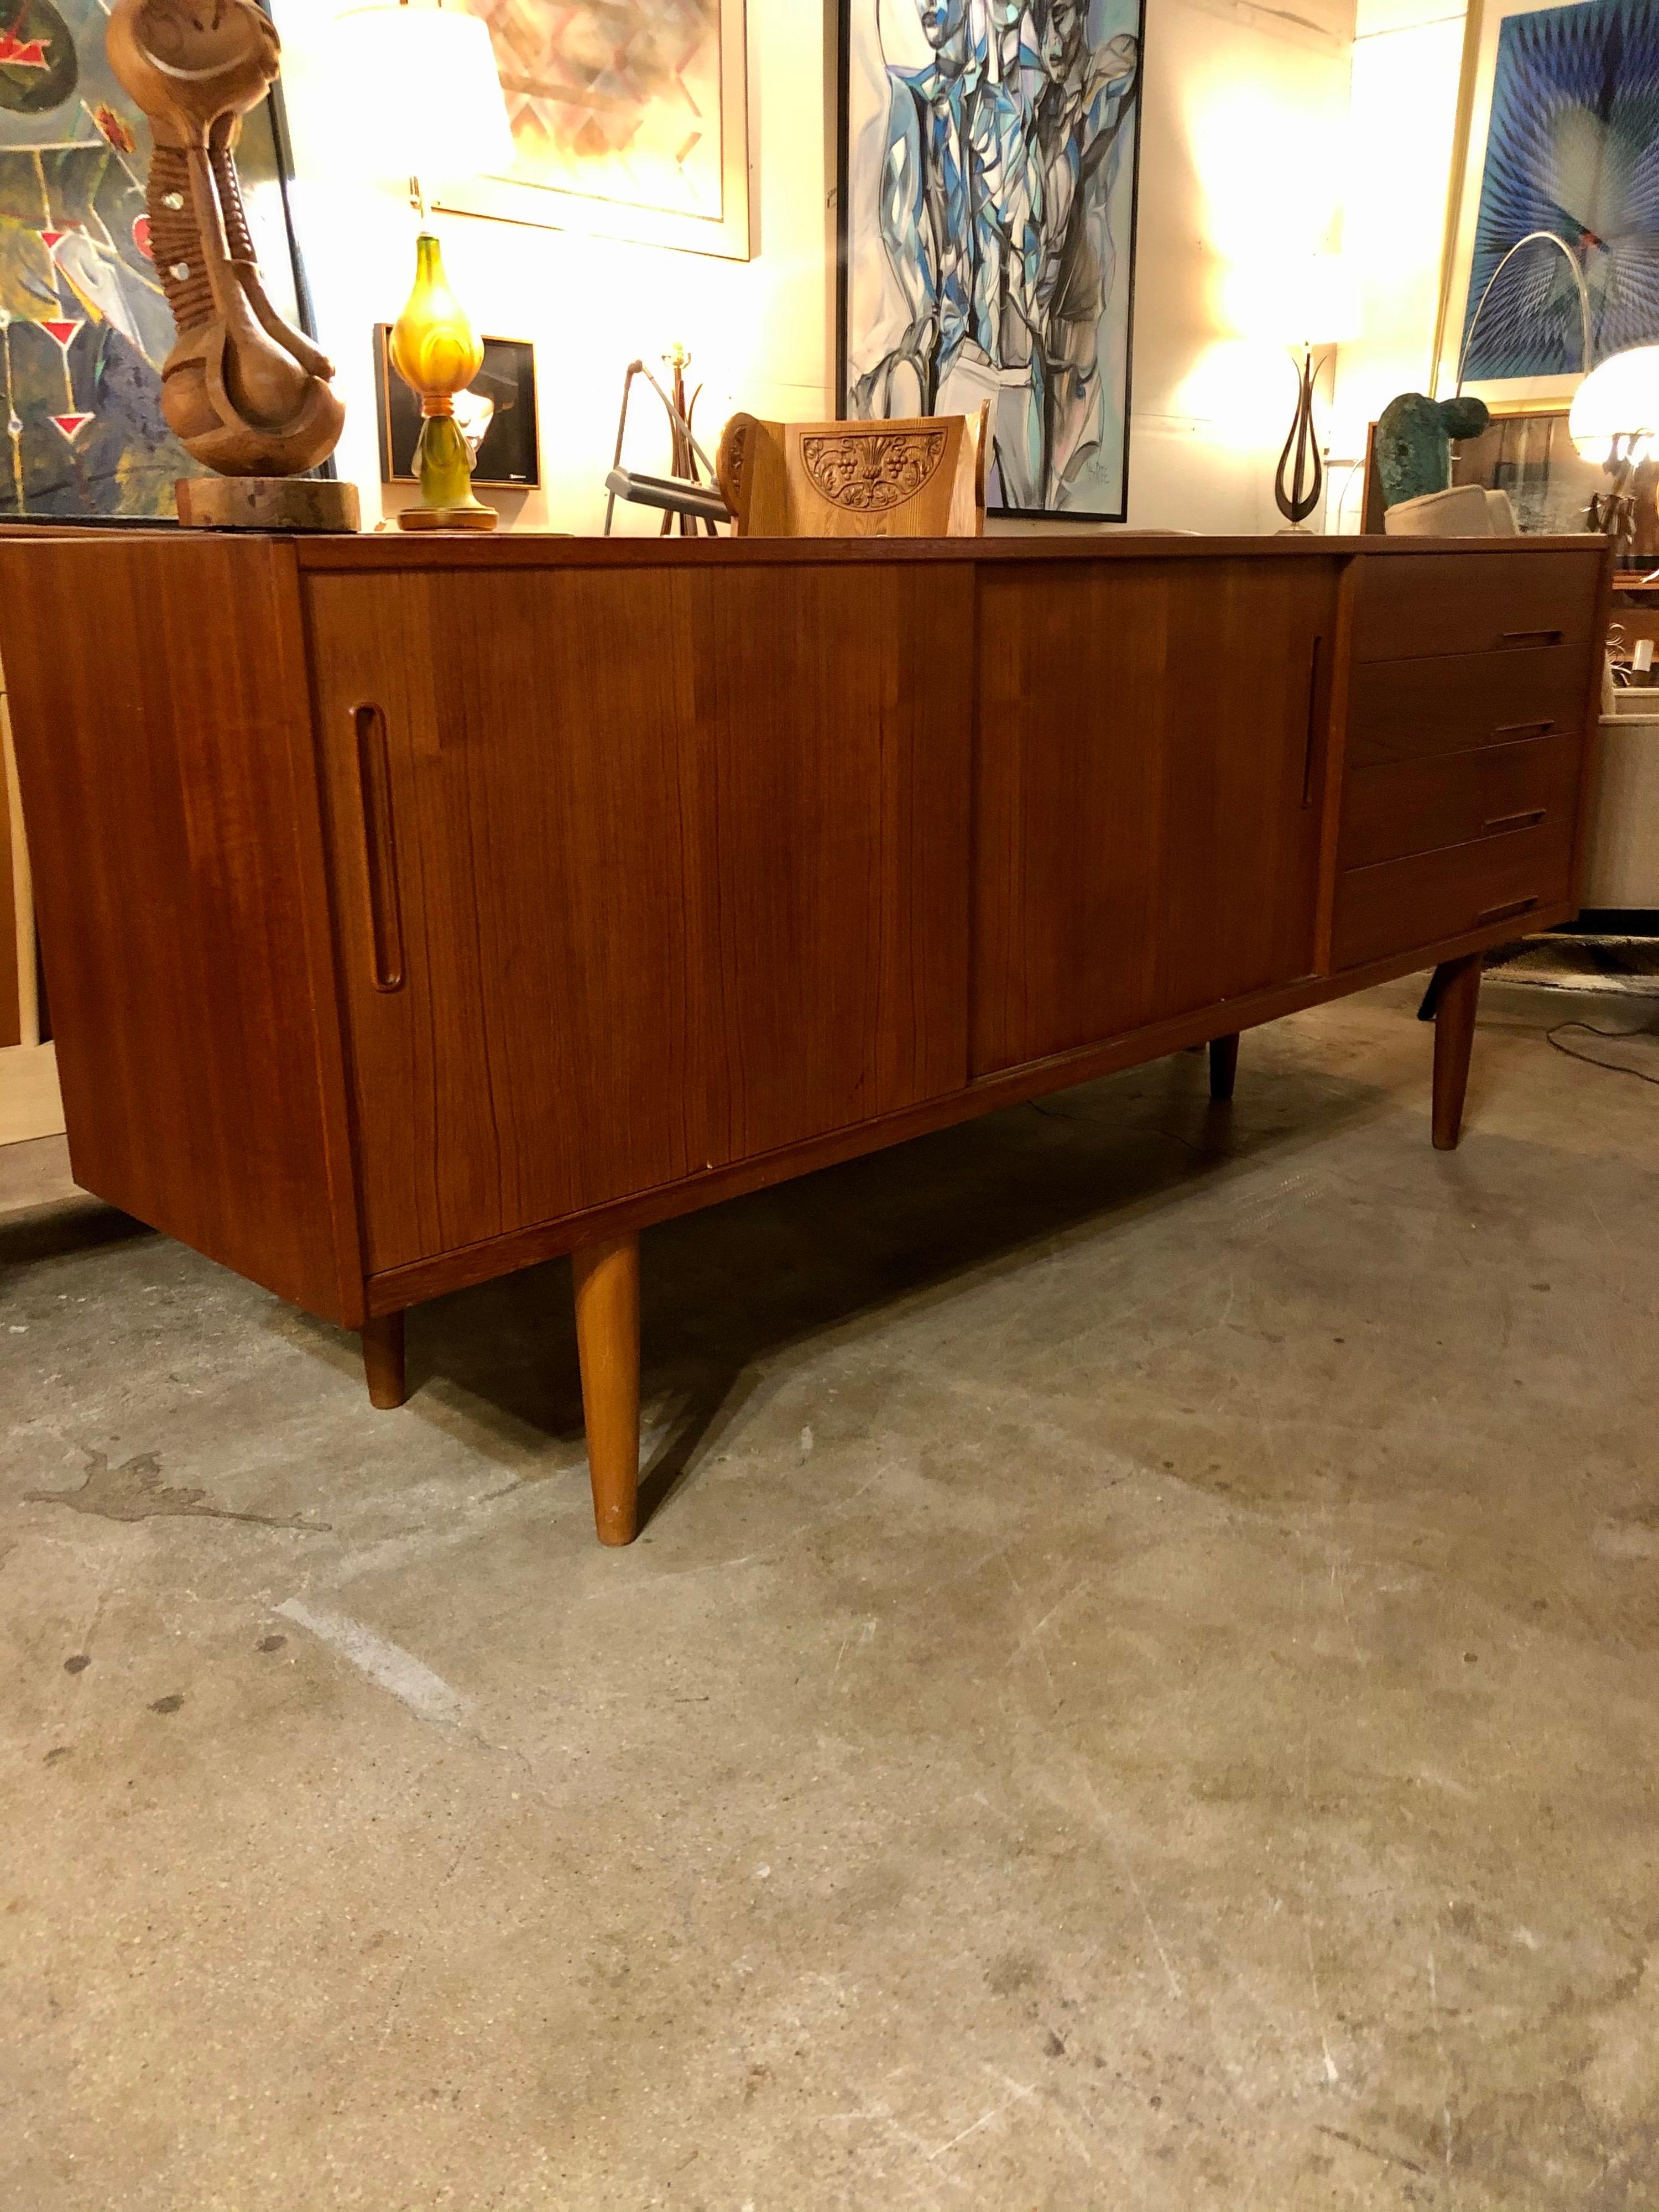 Mid-century teak credenza from the 60s was designed by Nils Jonsson for Hugo Troed features four drawers one with cutlery sections in blue felt and two sliding drawers. This modern credenza is in good condition.